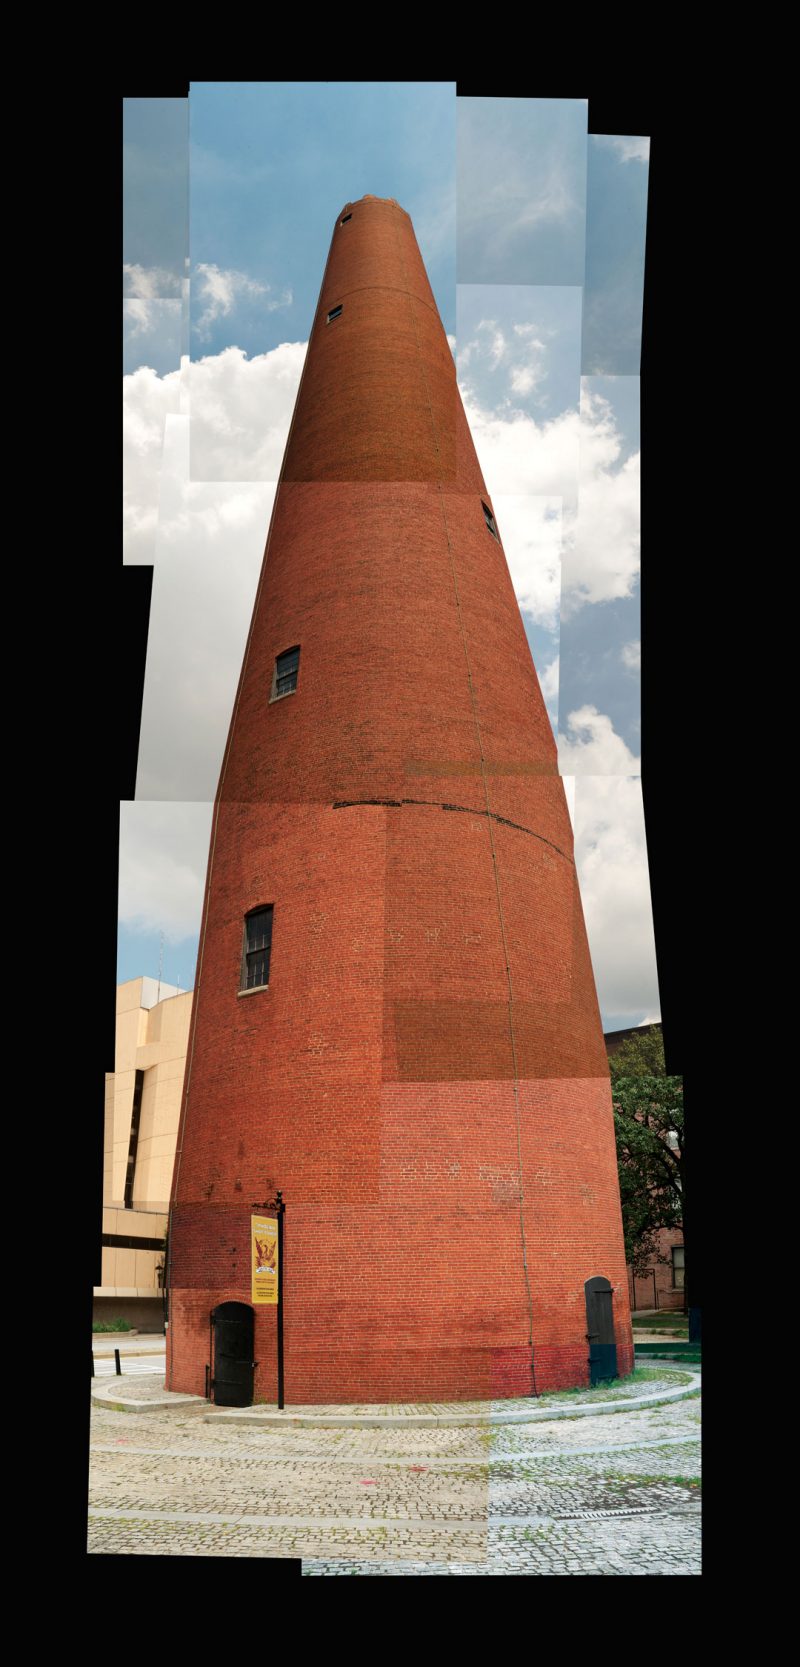 A photomontage of a red tower with forced perspective.